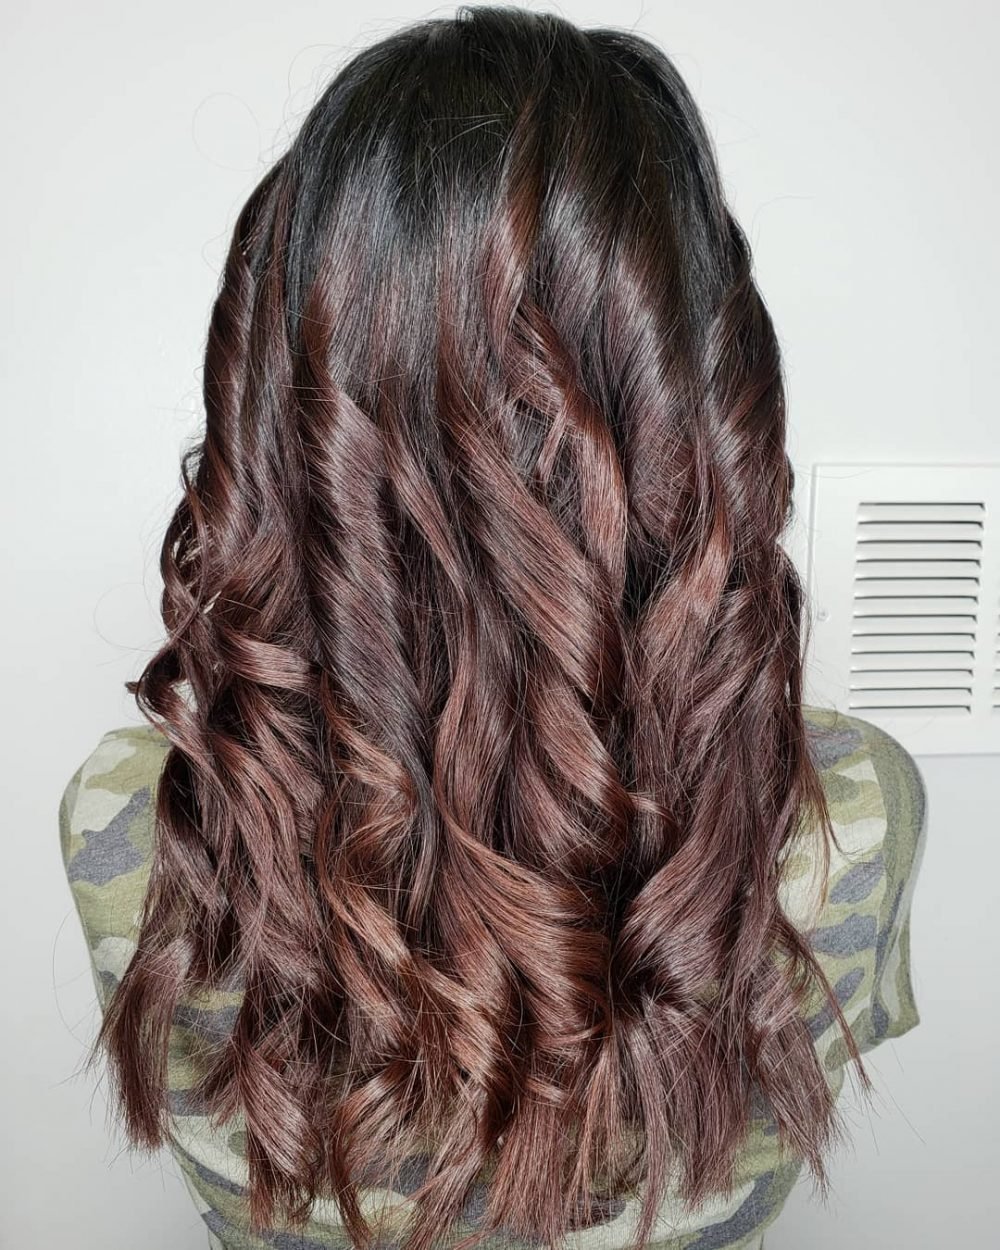 Dimensional Dark Red and Brown Hair Color